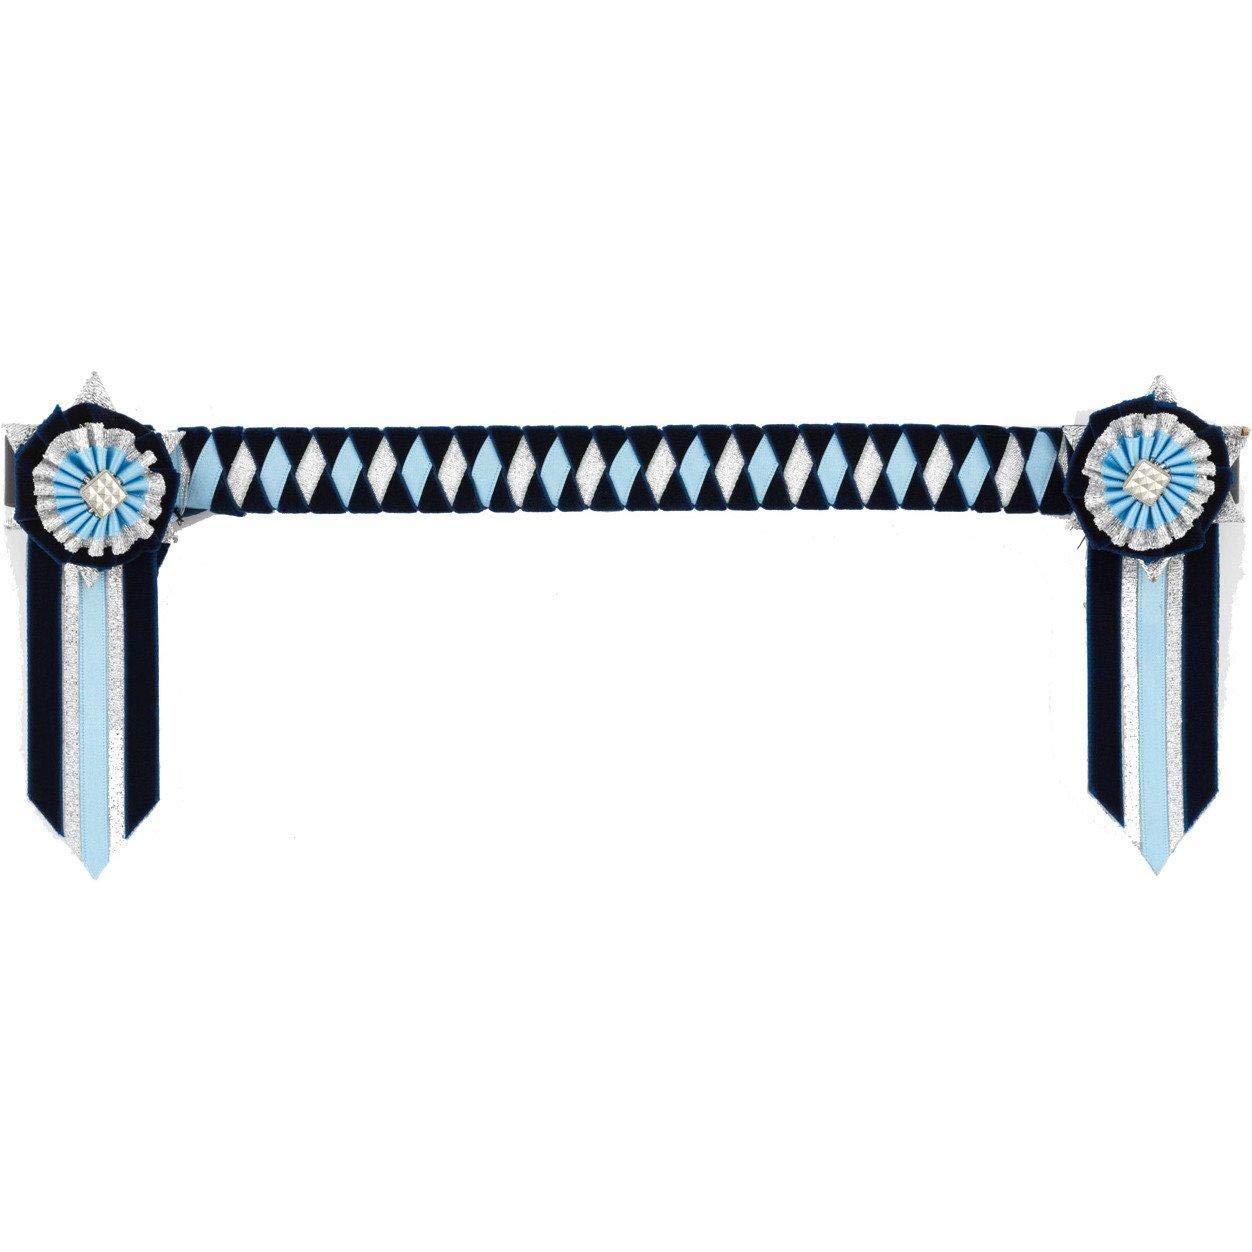 Showquest Boston Brow Band Full Size Navy Pale Blue Silver